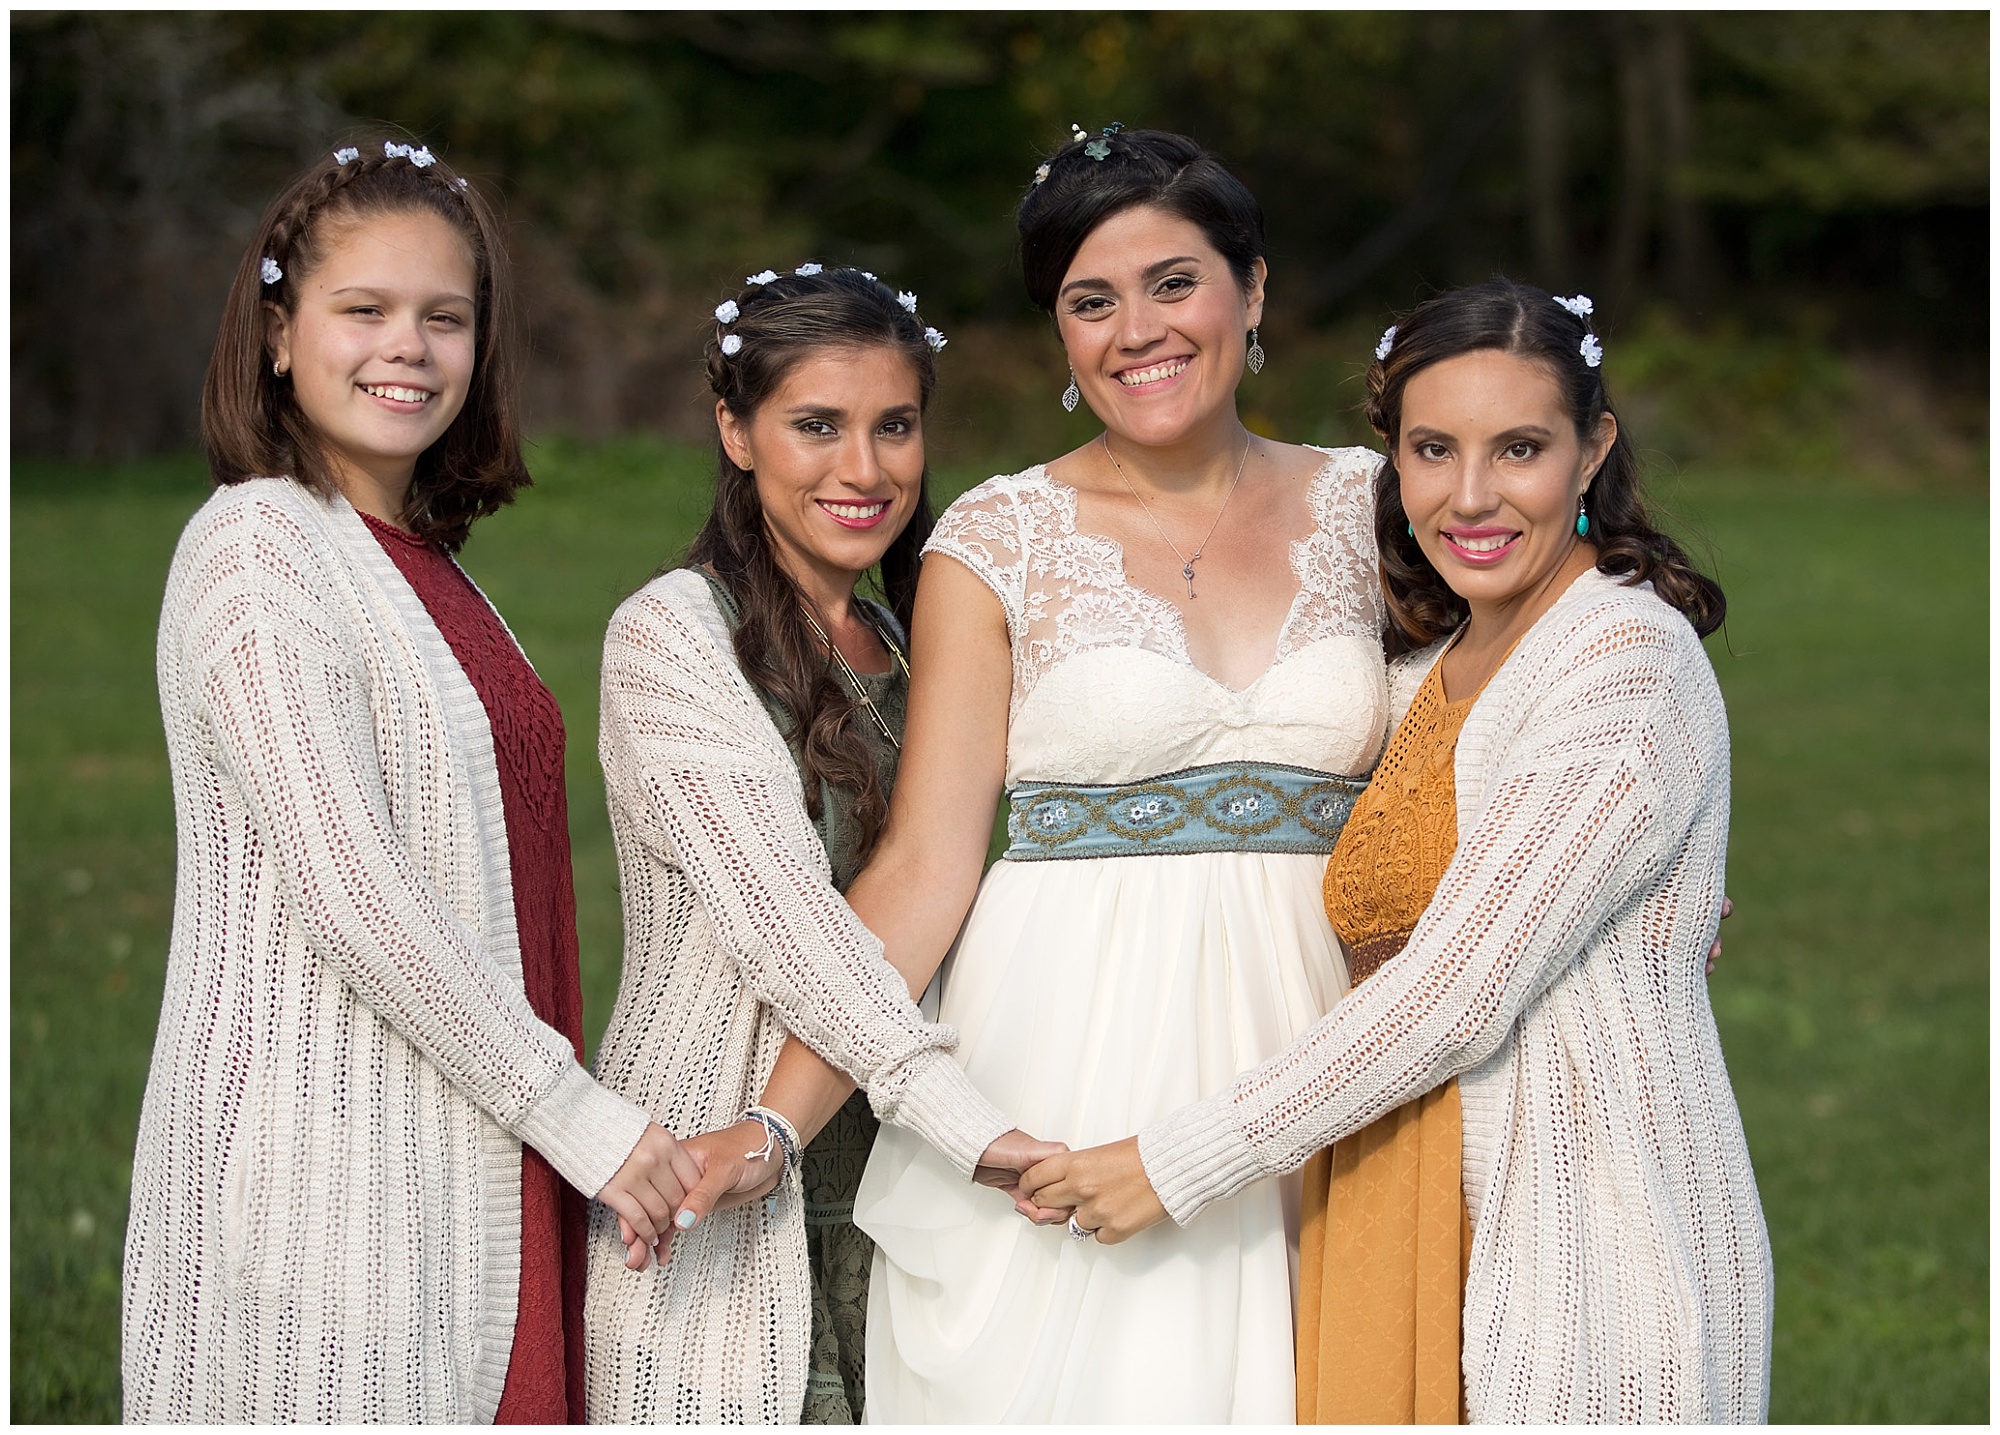 The bride and bridesmaids holding hands in this group portrait